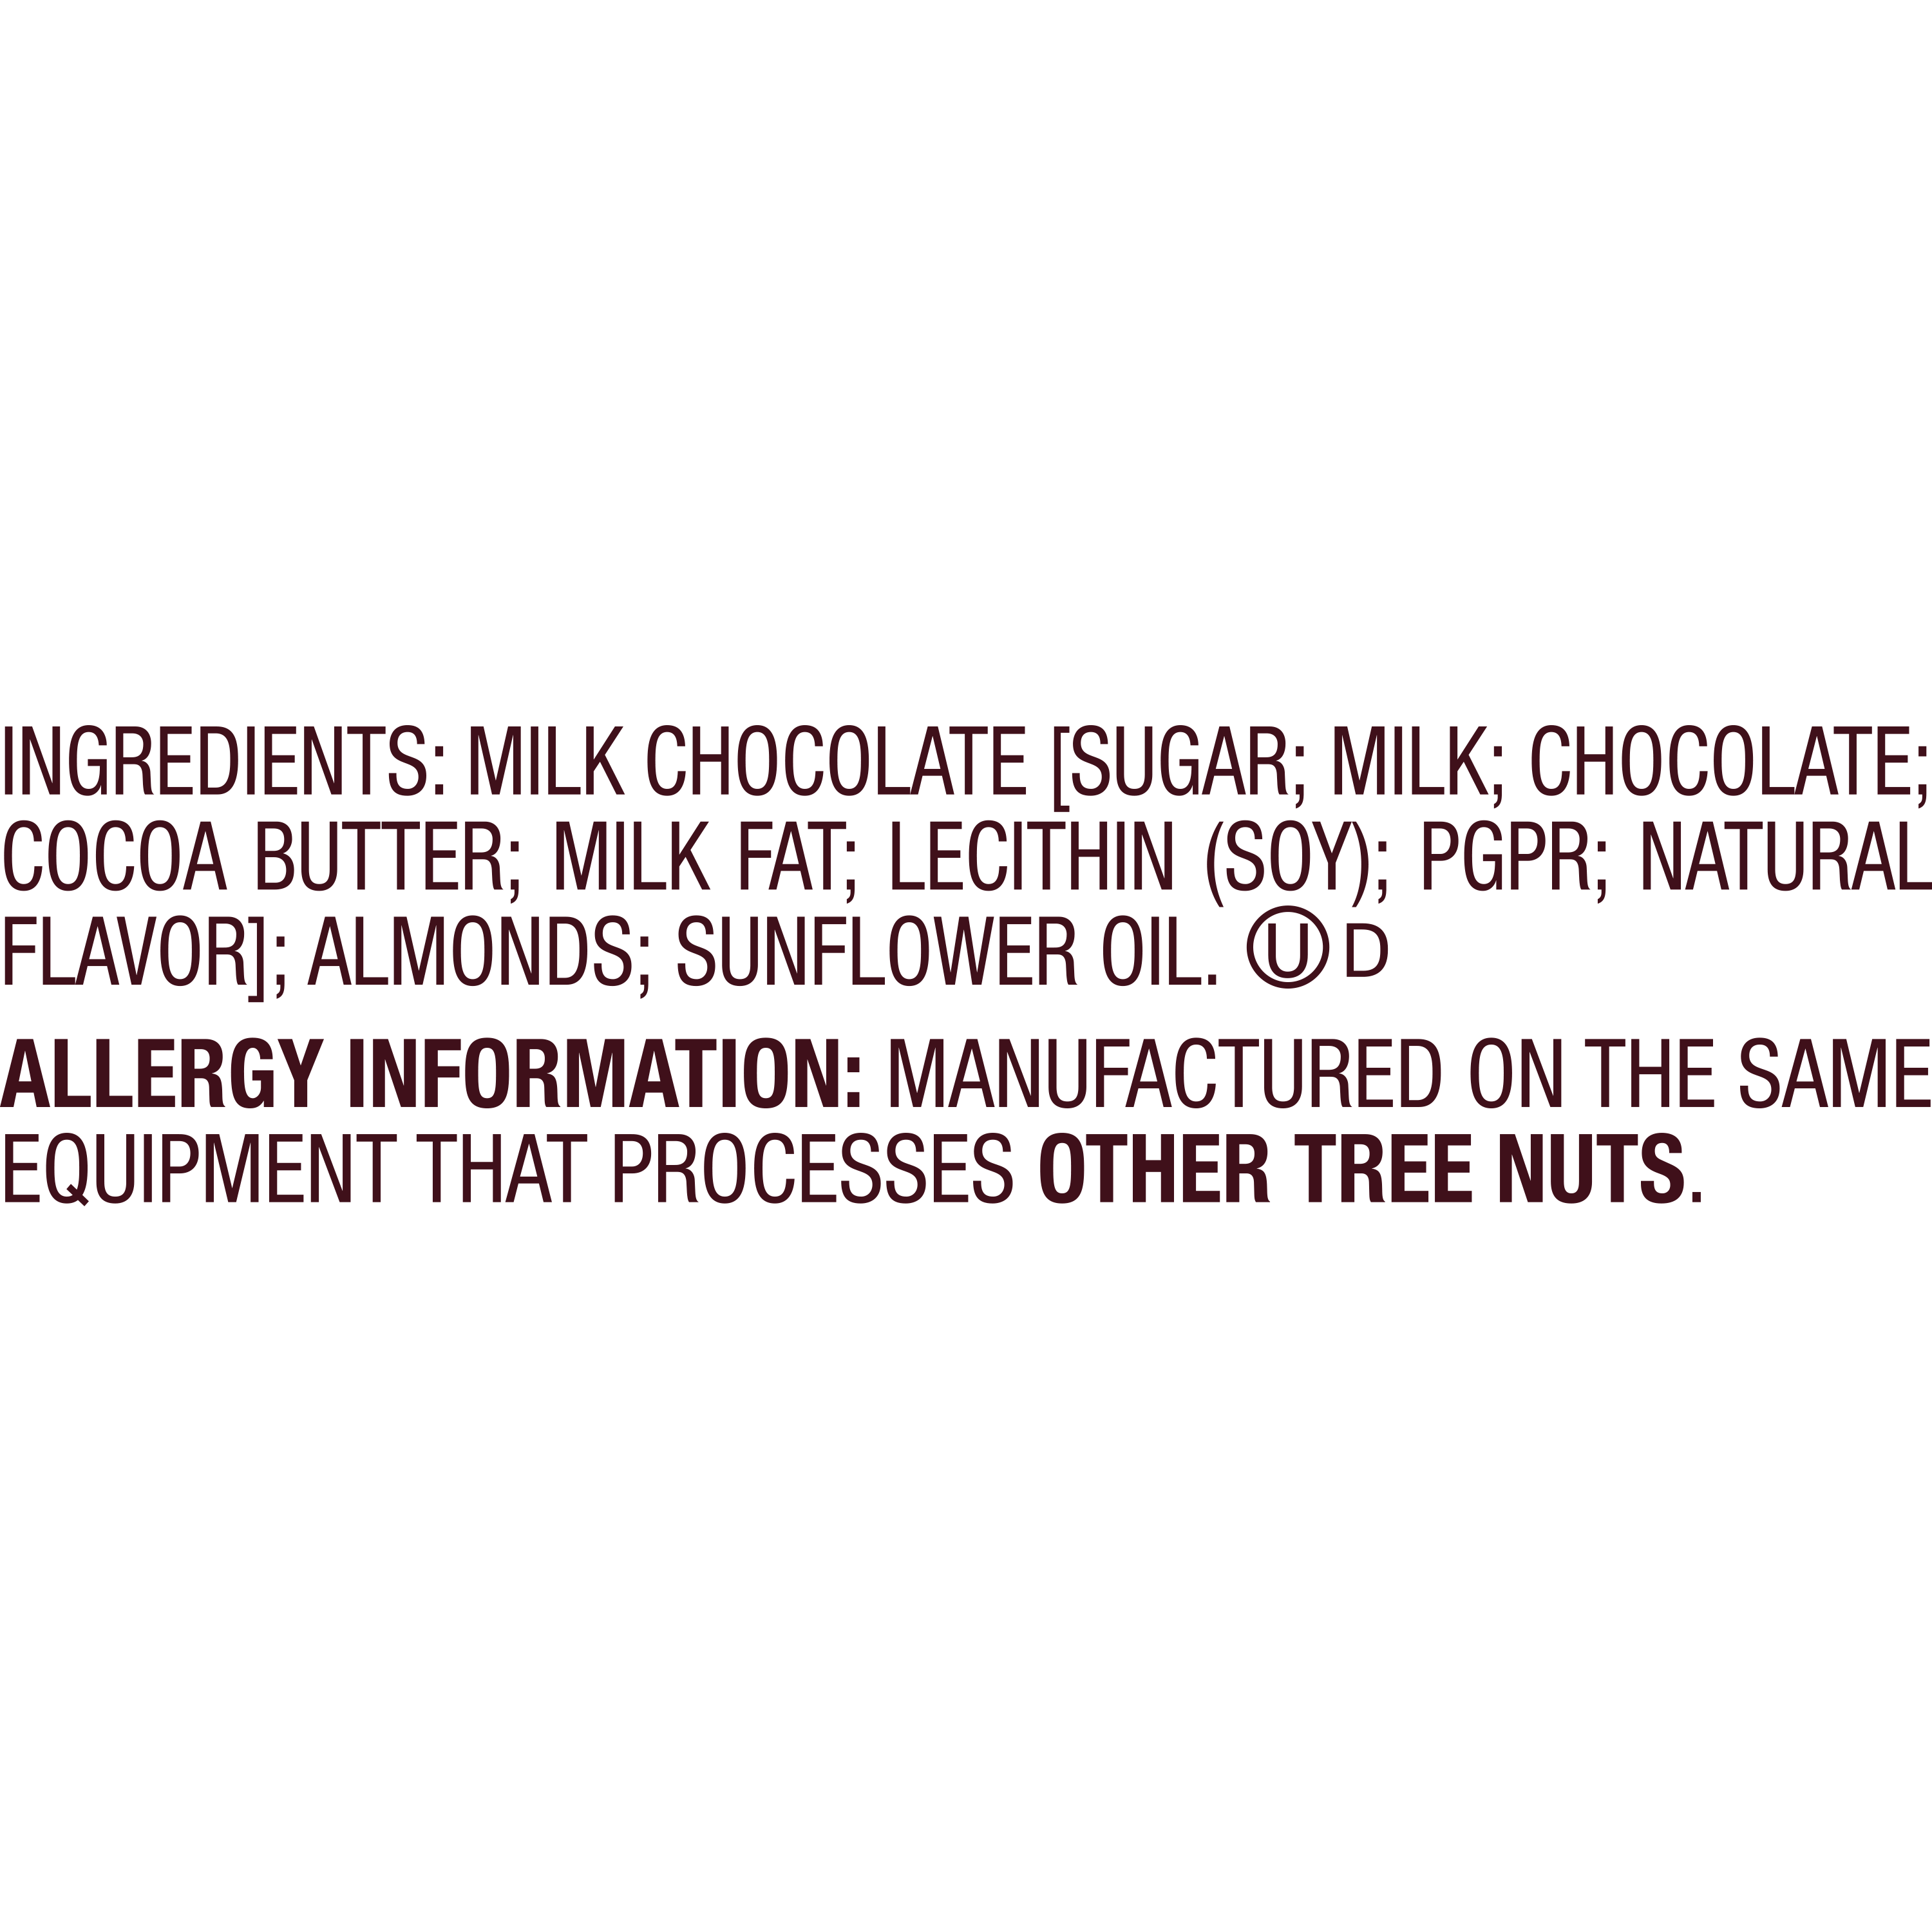 HERSHEY'S KISSES Milk Chocolate with Almonds Candy, 32 oz pack - Ingredients